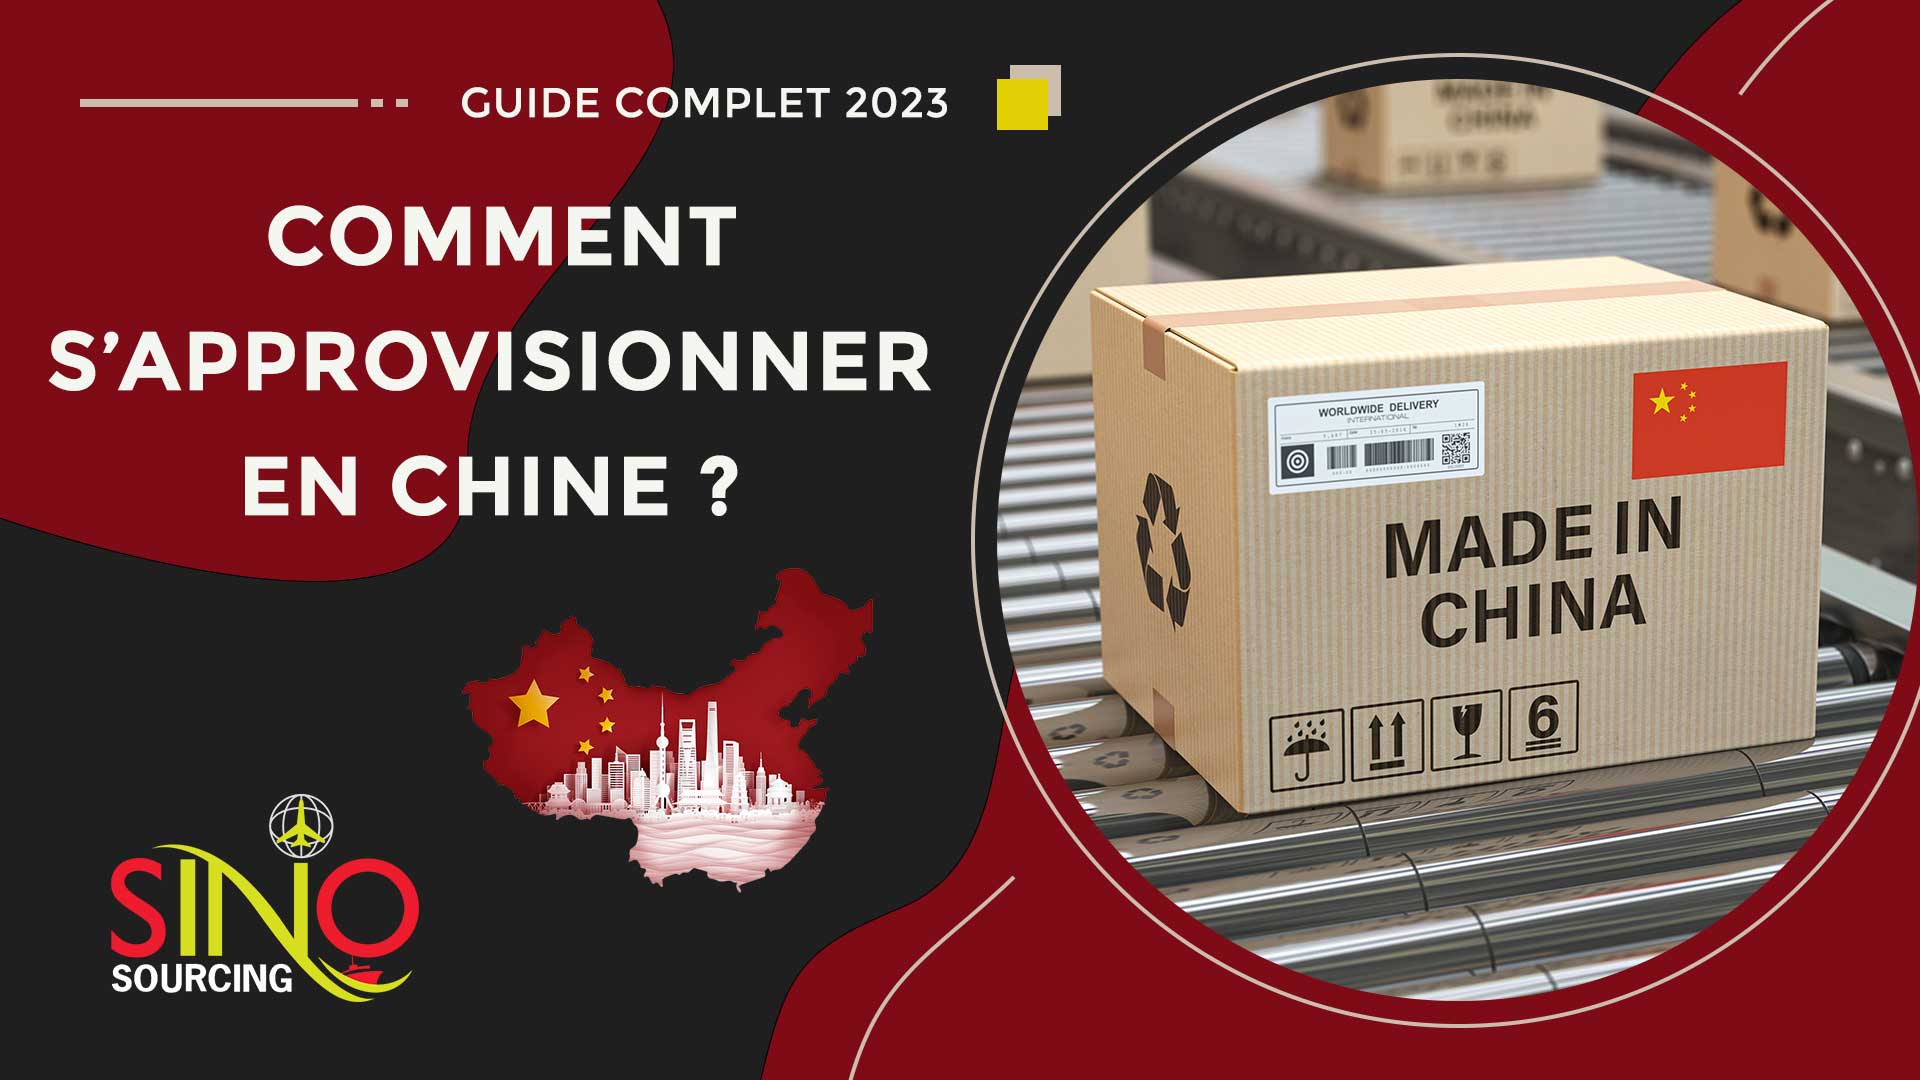 Comment s’approvisionner en Chine ? [GUIDE COMPLET 2023]